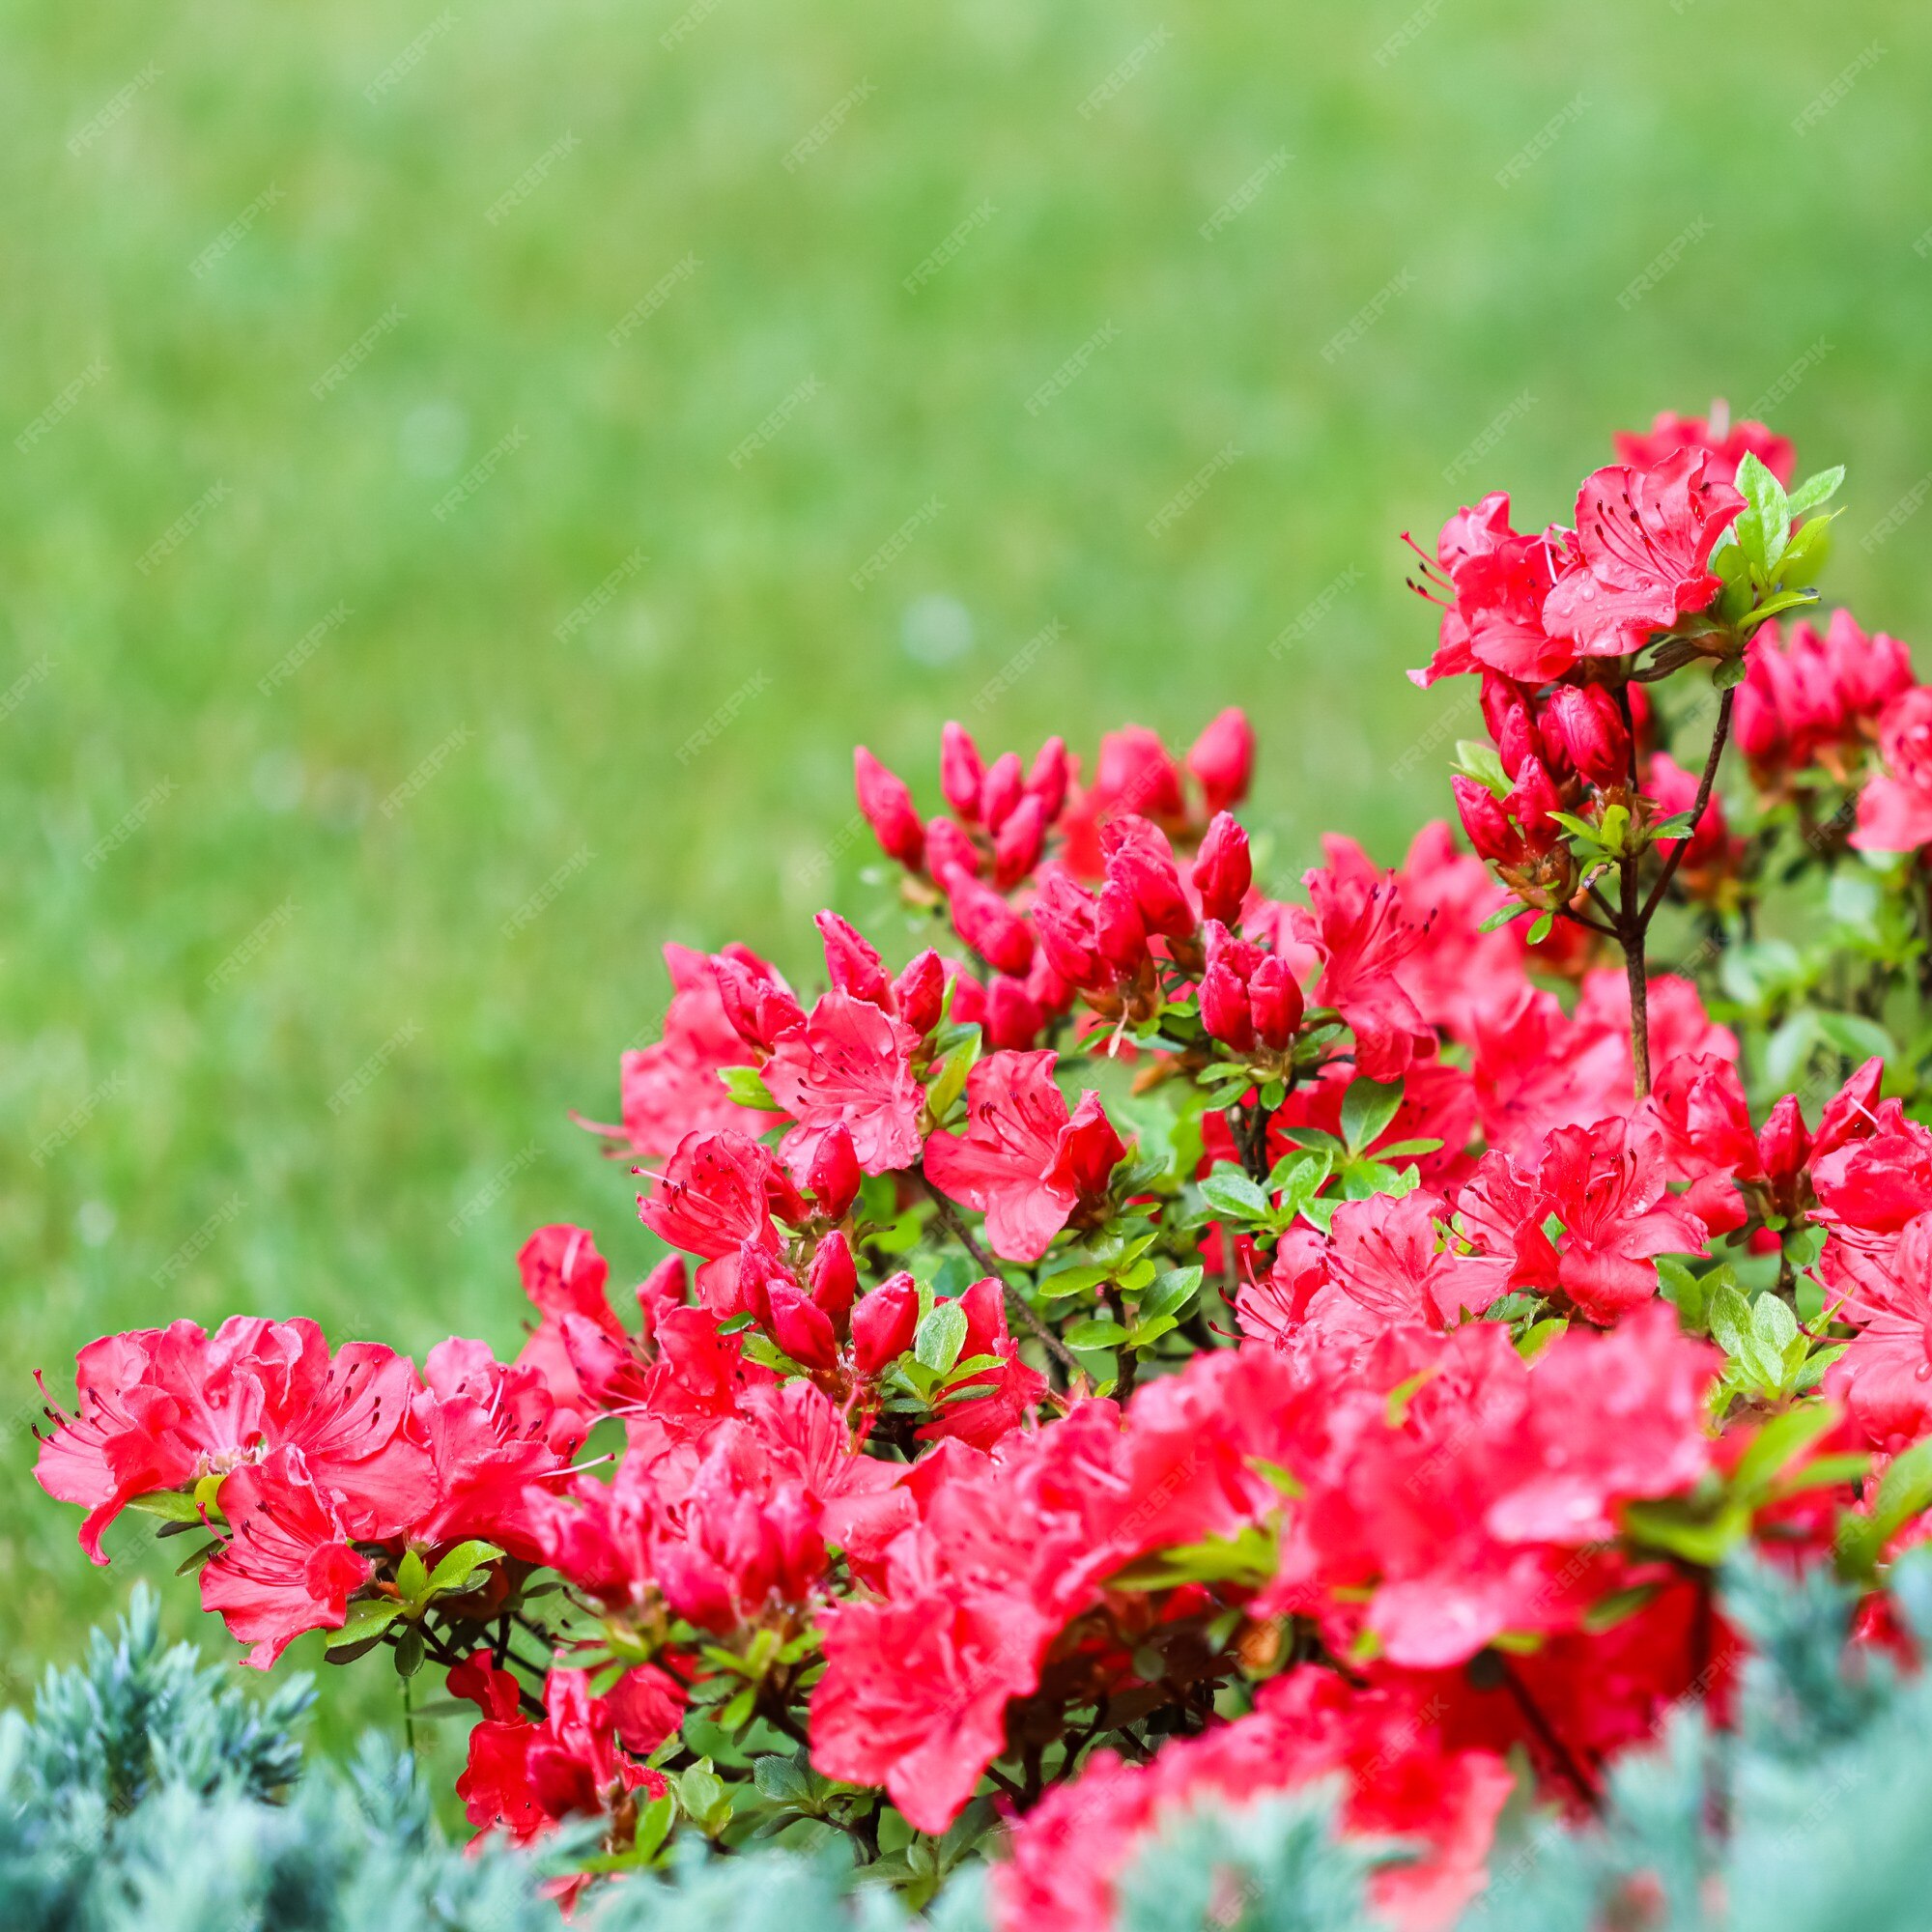 Premium Photo | Blooming red azalea flowers and buds on a green background  in a spring garden